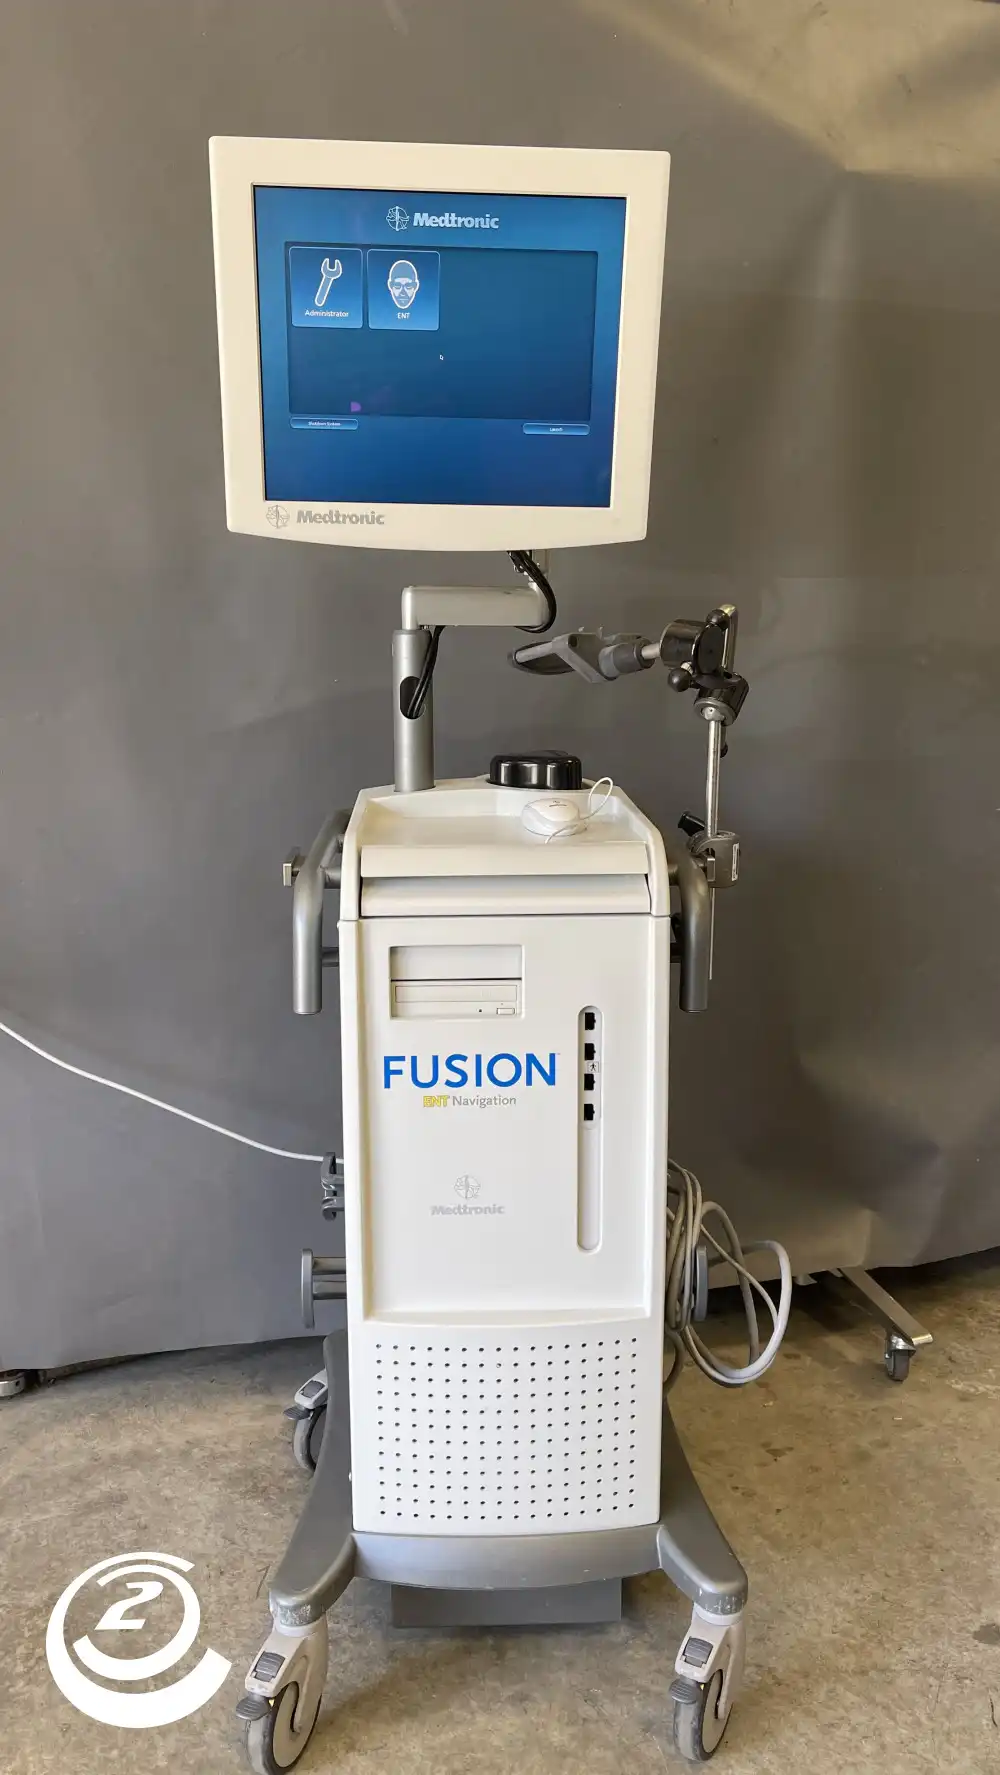 Medtronic Fusion